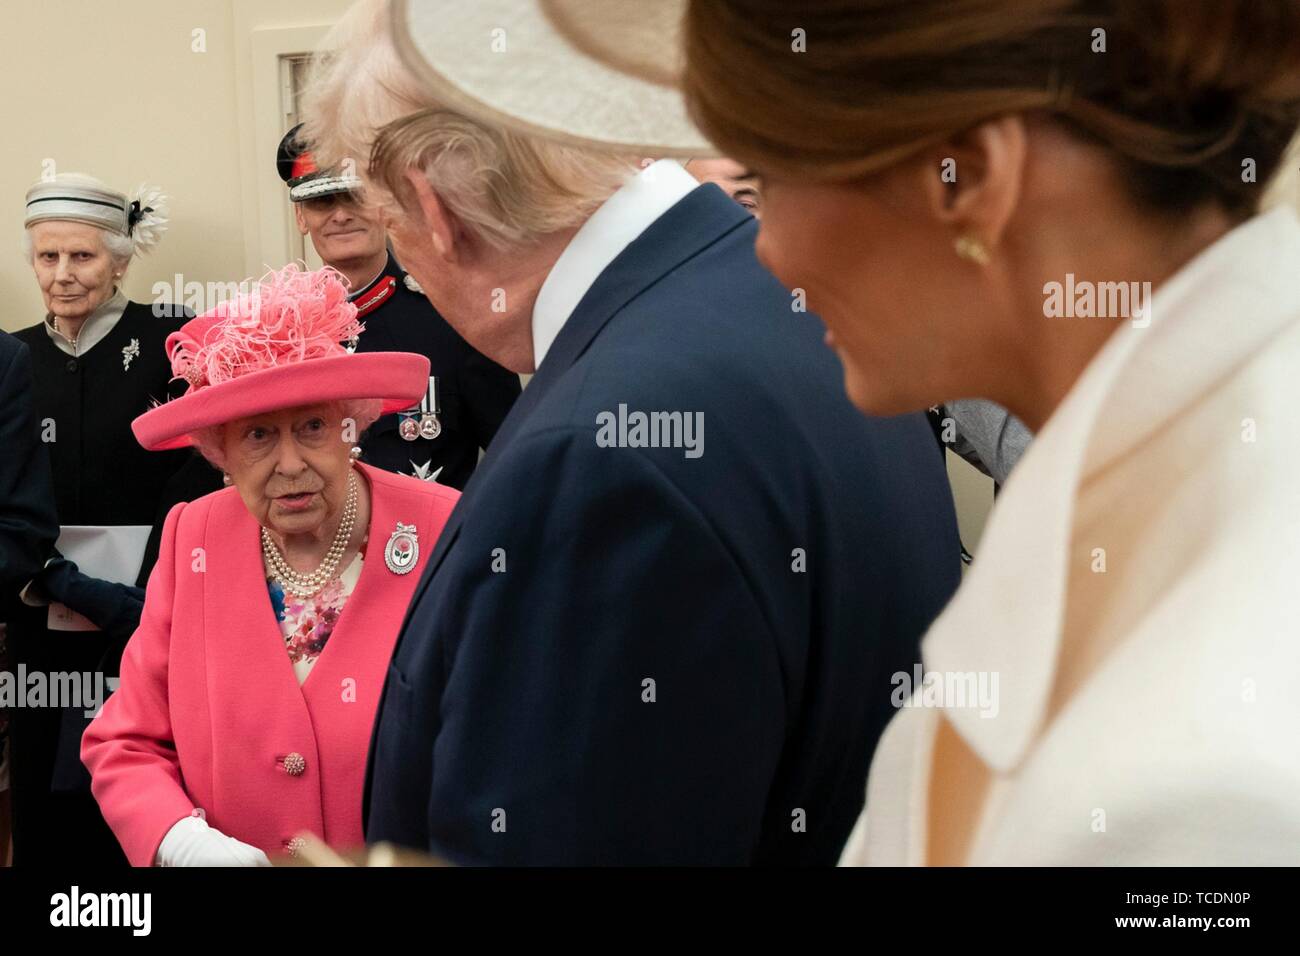 U.S President Donald Trump and First Lady Melania Trump chat with Queen Elizabeth II during an event marking the 75th anniversary of D-Day June 5, 2019 in Portsmouth, England. Stock Photo